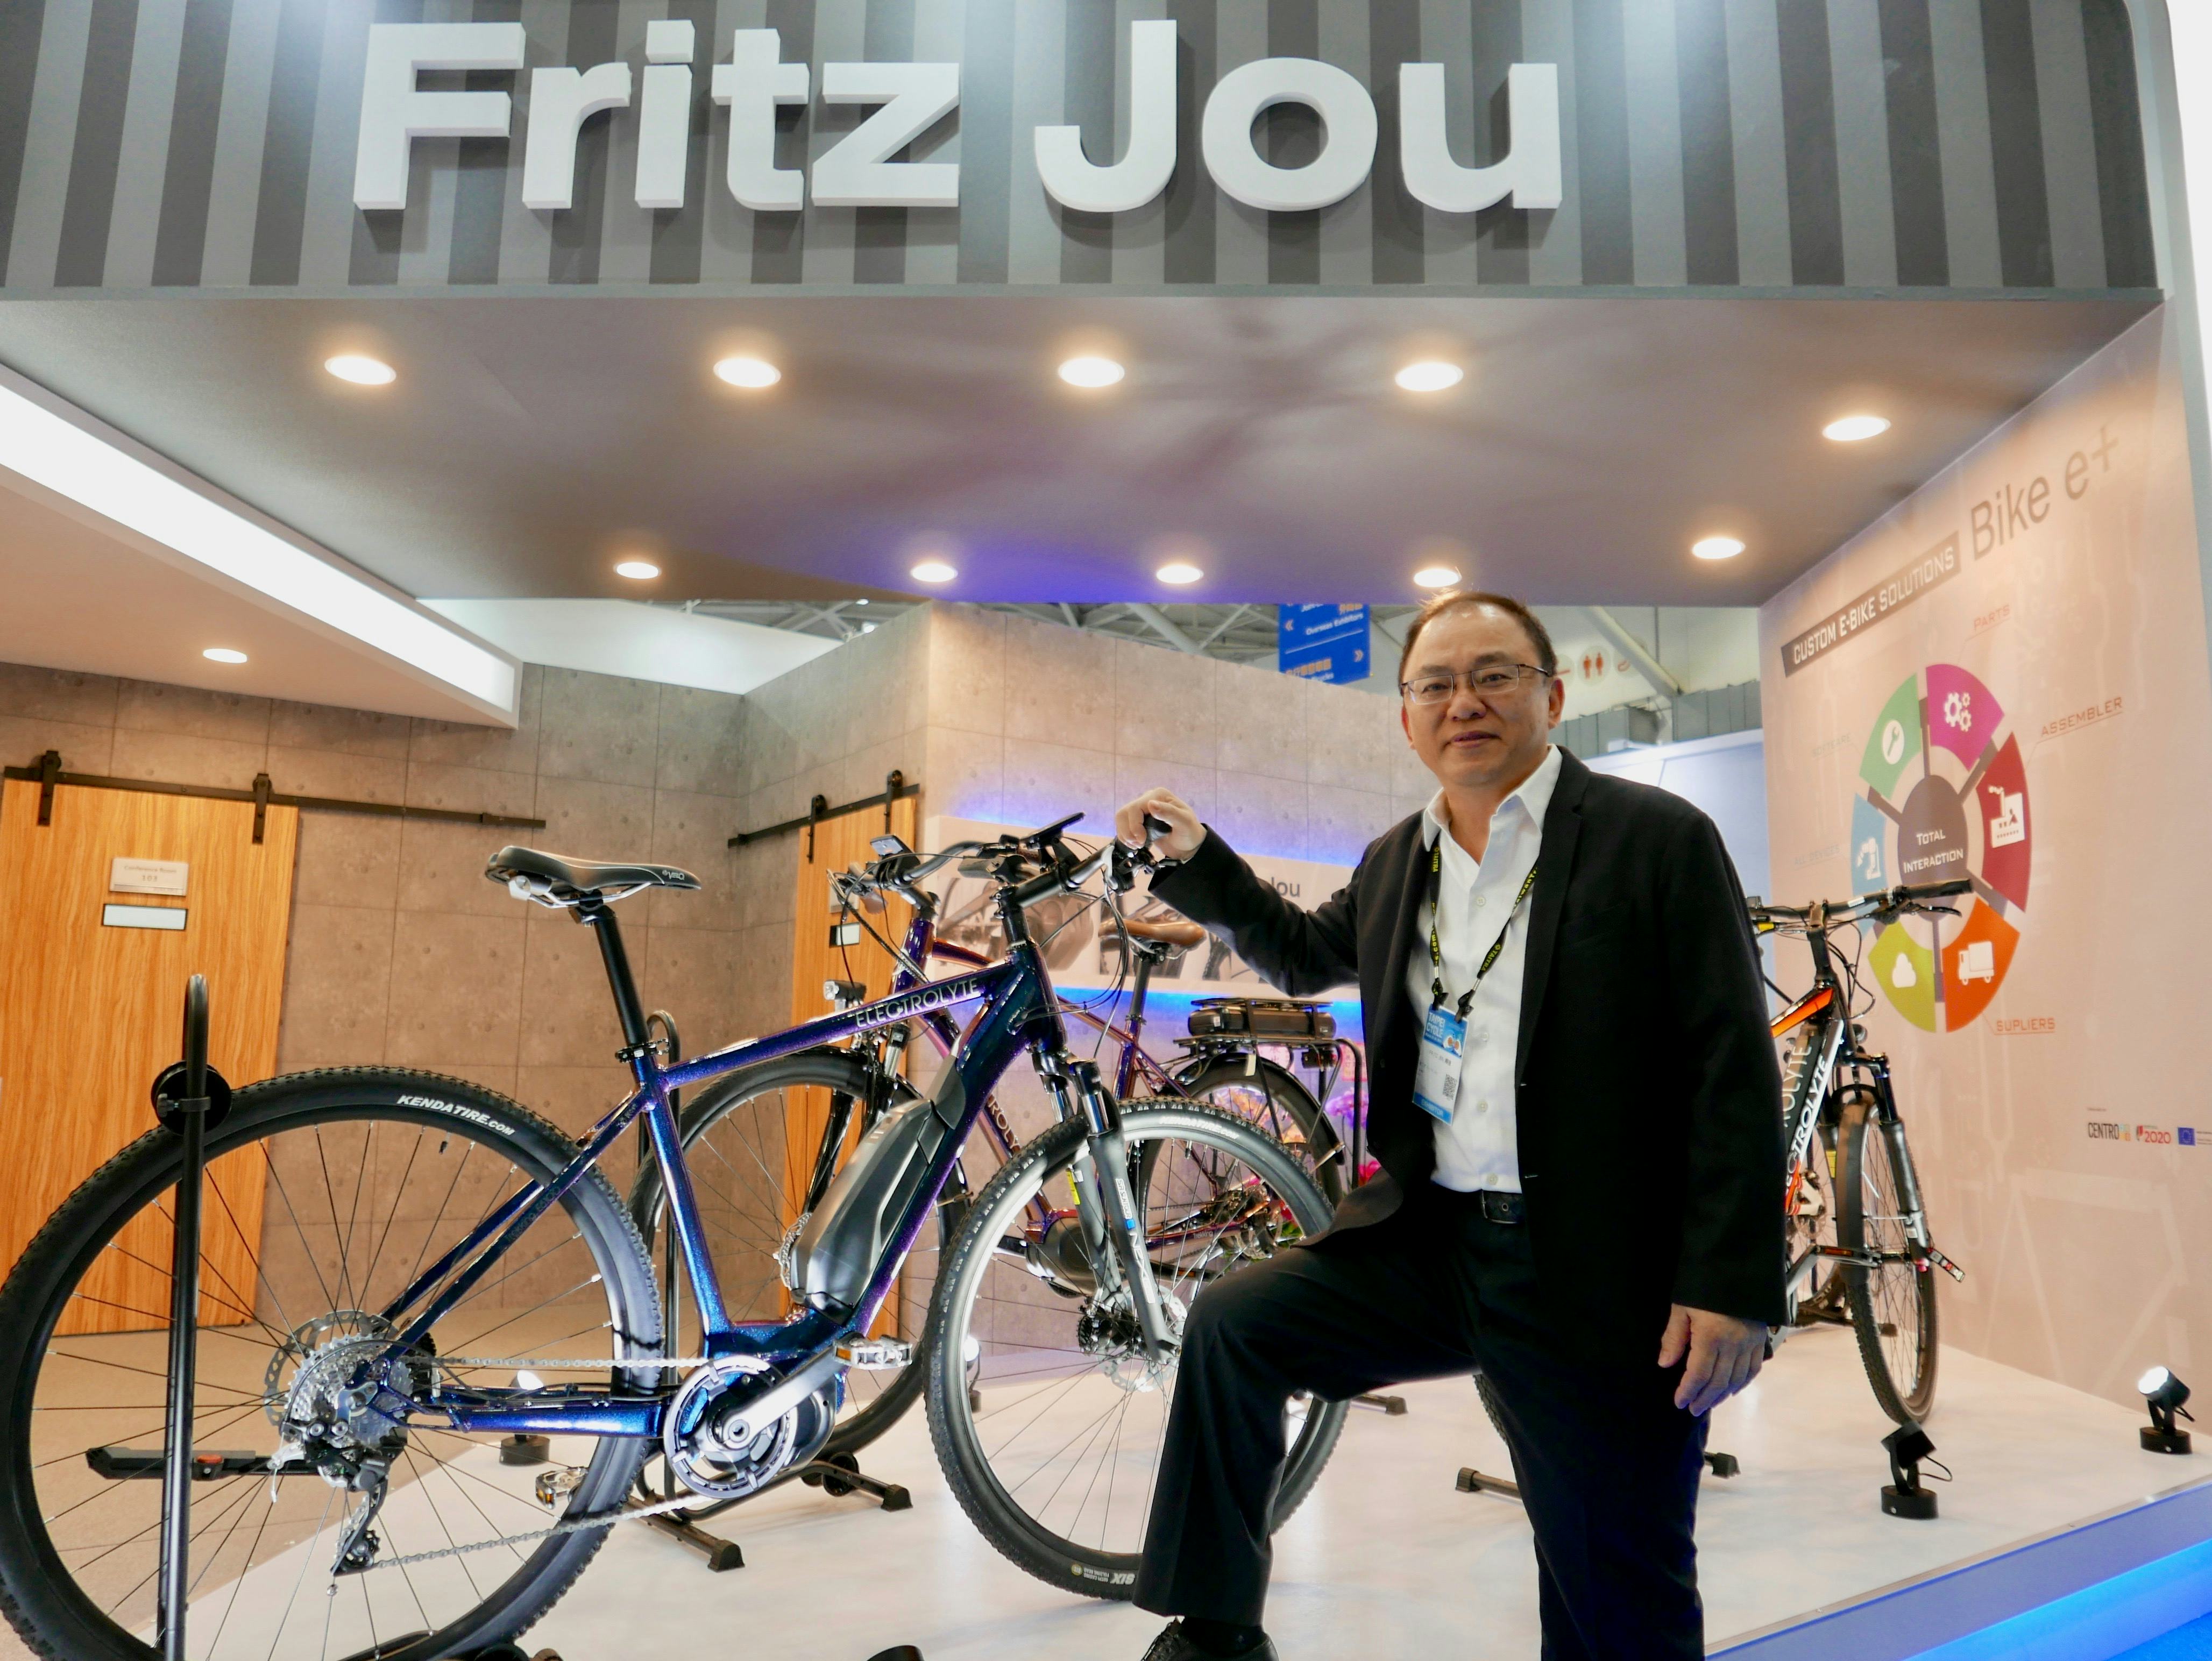 ‘Aim is to run at full capacity of 300,000 units by end of 2019,’ says Fritz Jou. – Photo Jo Beckendorff